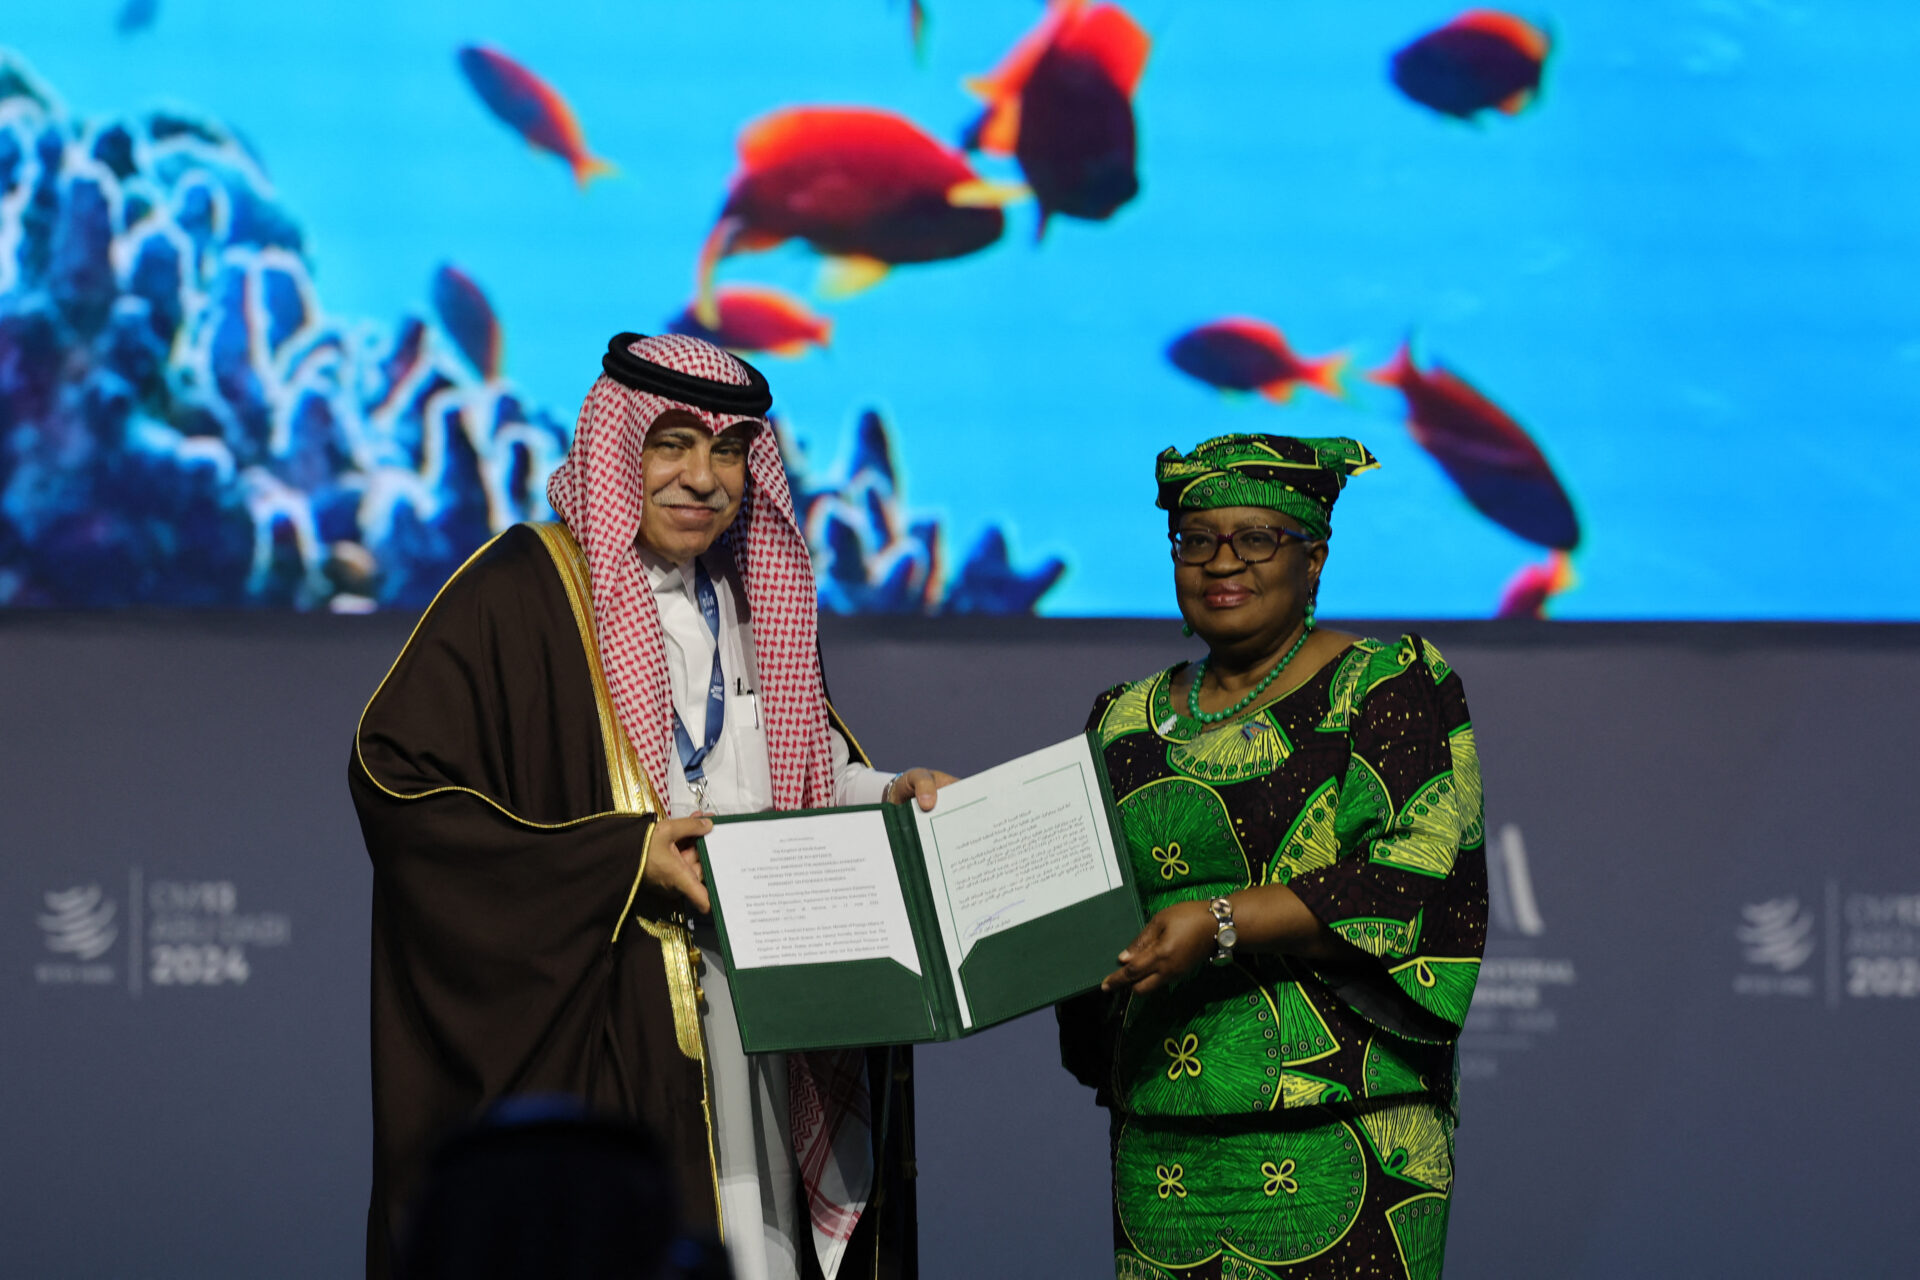 Director-General of the World Trade Organization Ngozi Okonjo-Iweala and Saudi Minister of Commerce and Investment Majid bin Abdullah Al Qasabi pose for a picture with signed documents during a session on fisheries subsidies during the 13th WTO Ministerial Conference in Abu Dhabi today. (Photo: Getty Images)